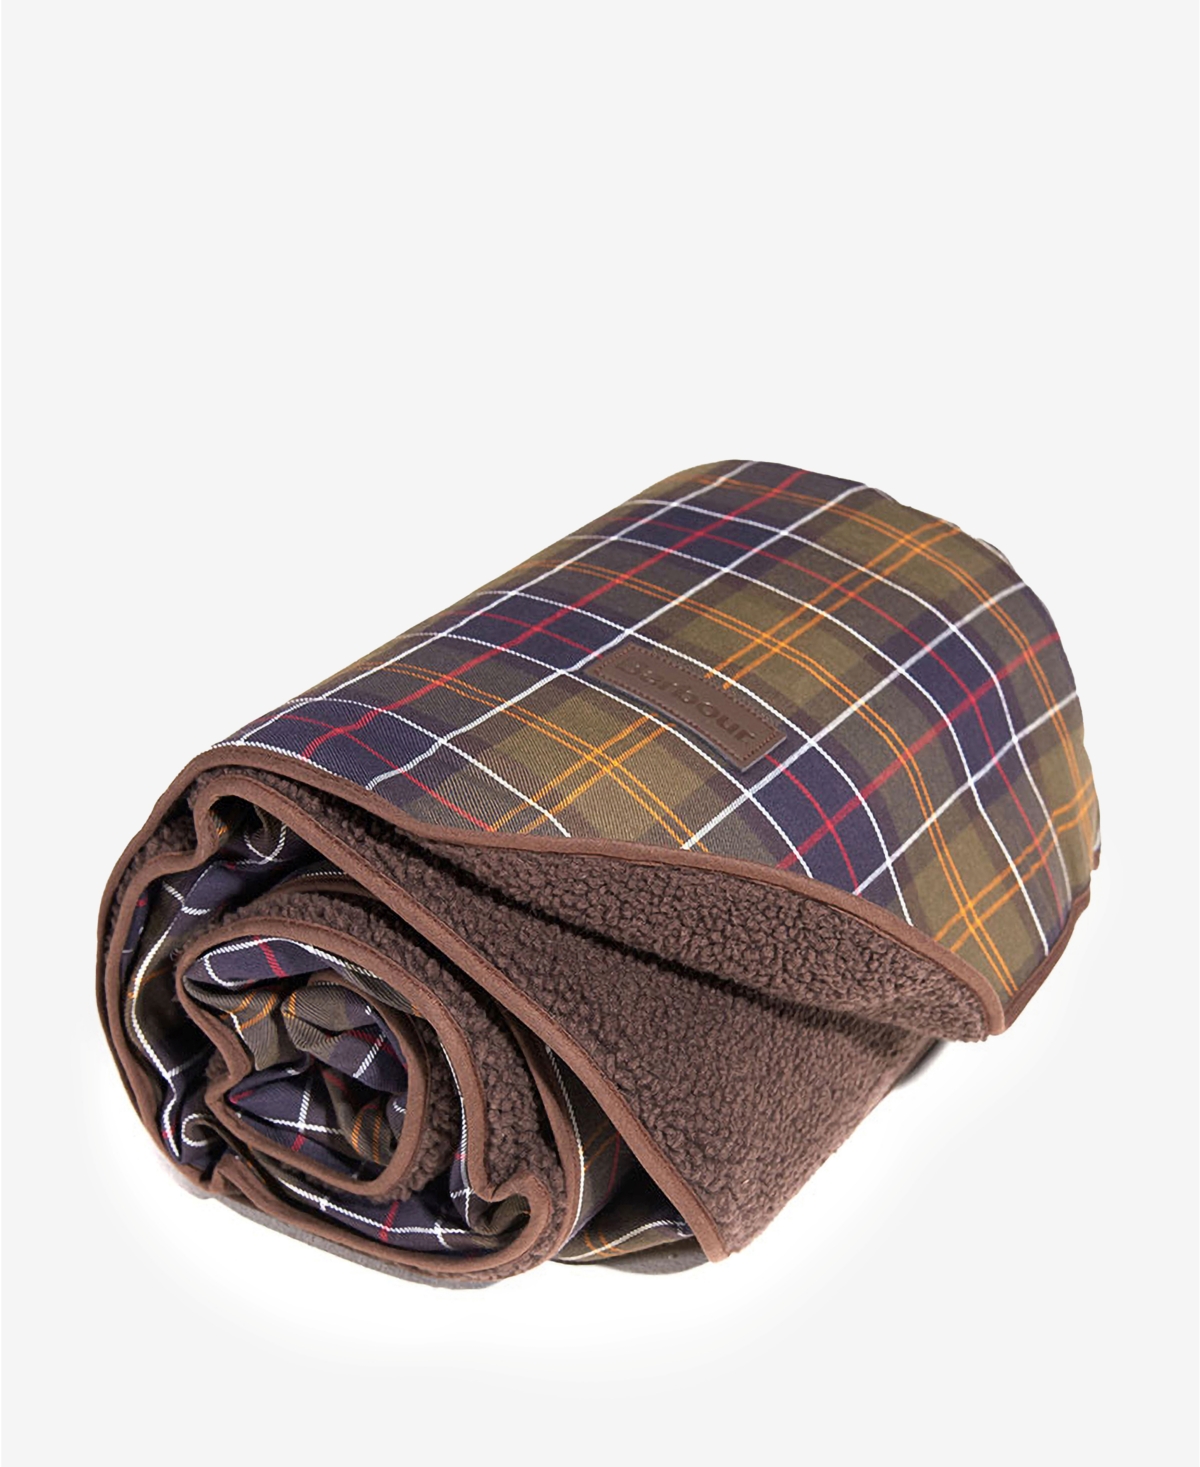 Large Dog Blanket - Brown, Classic